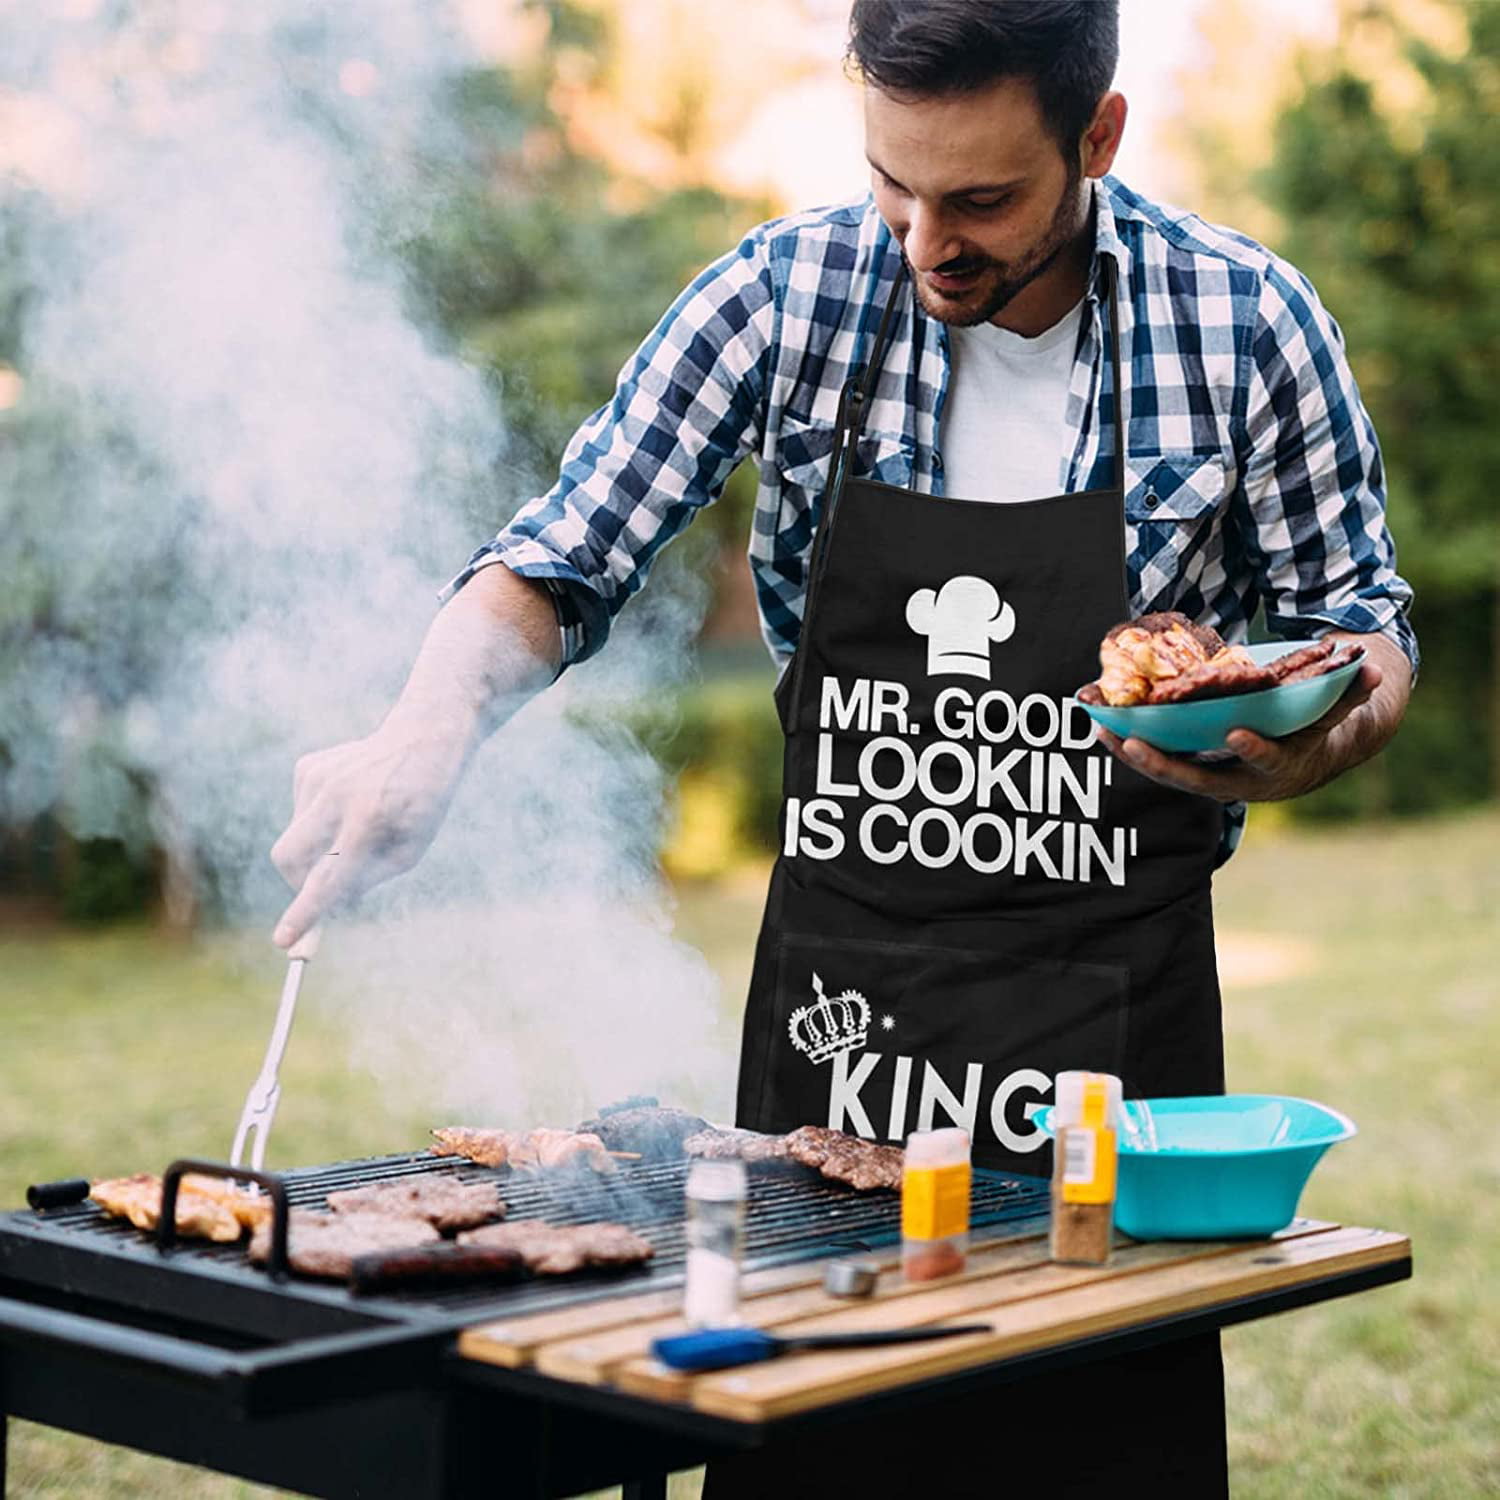 Famnosta Funny Aprons for Men,Christmas Gifts for Dad,Birthday Gifts,Funny  BBQ Gifts,Cooking Gifts,Grilling Aprons for Men